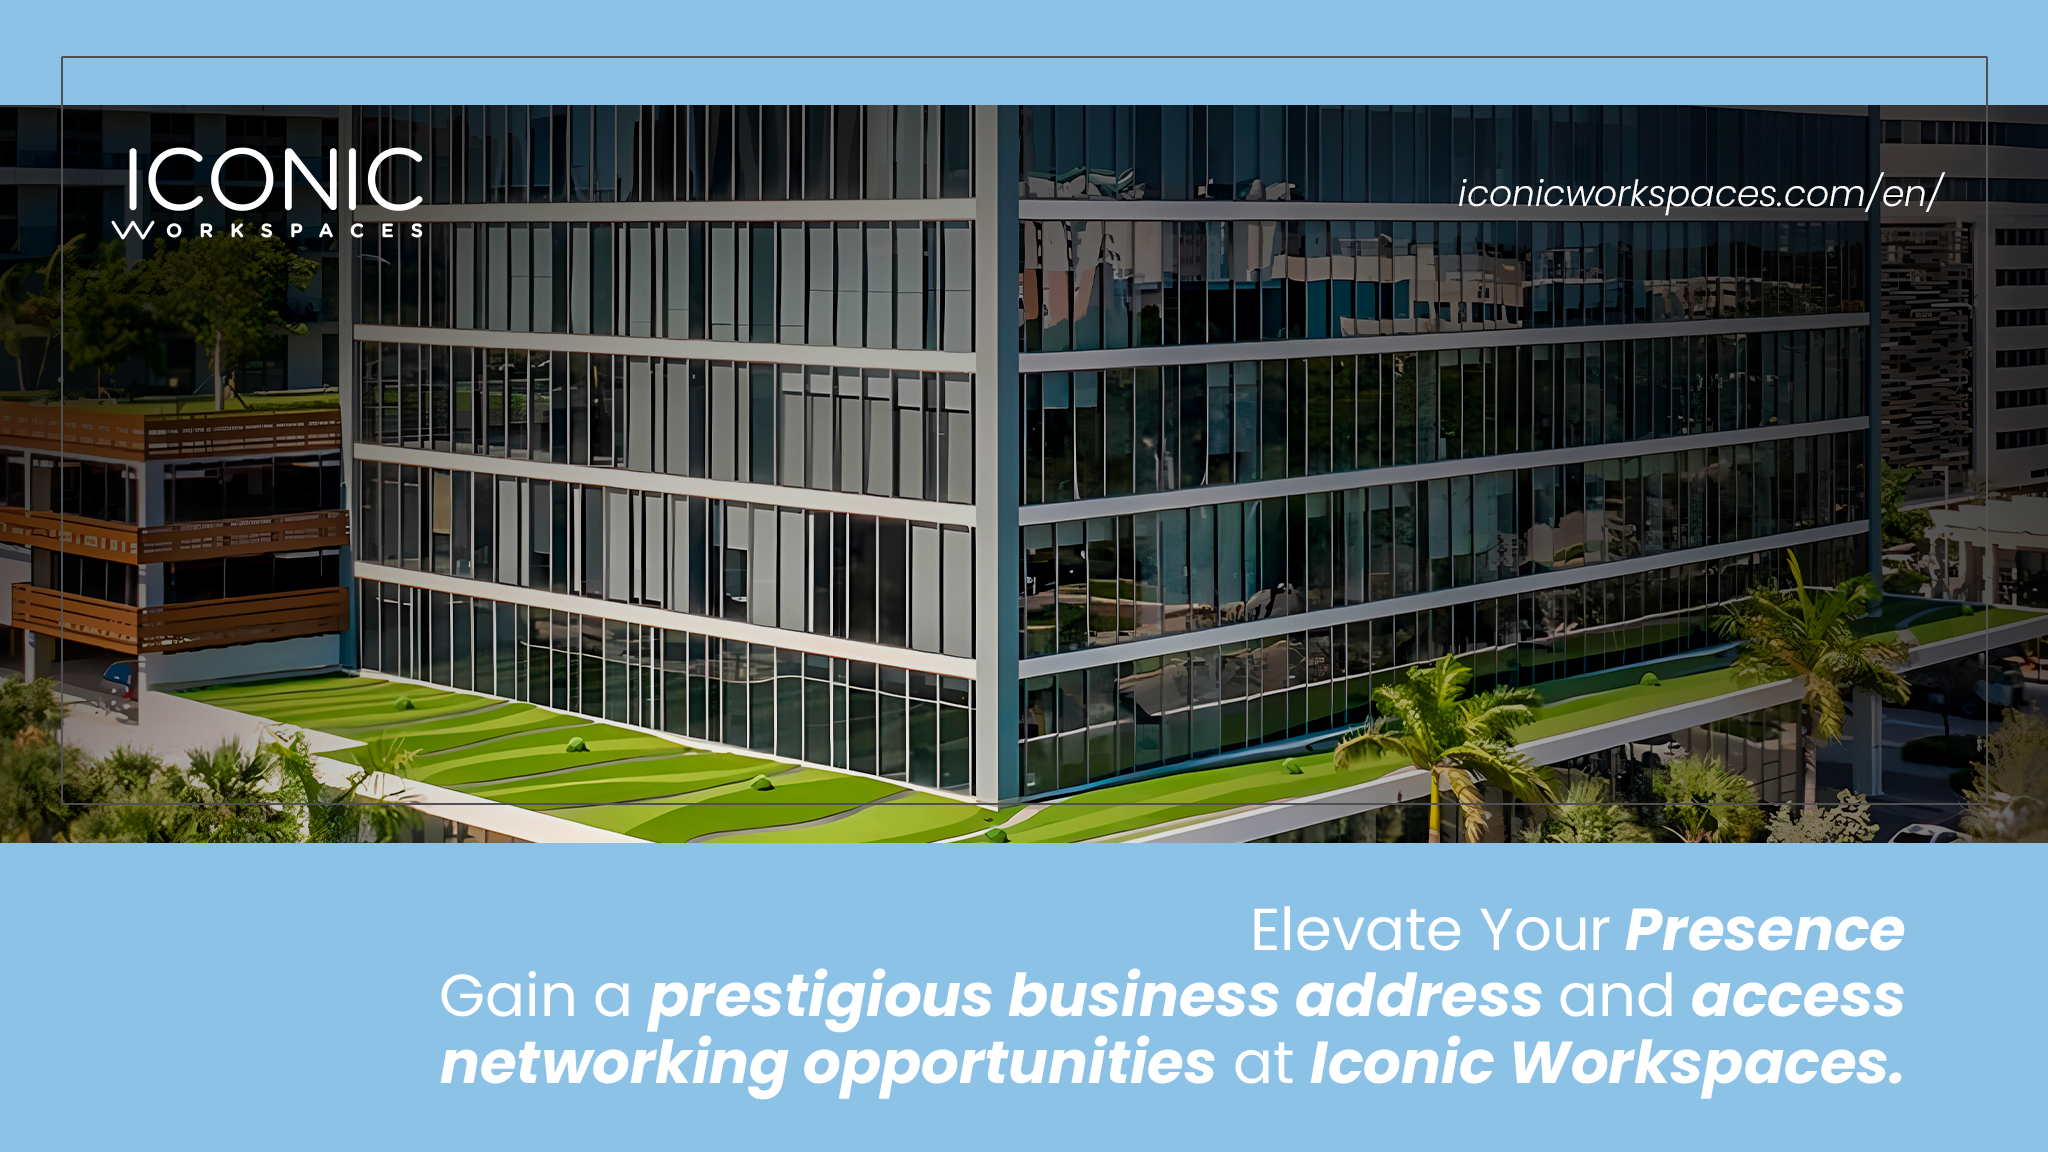 Elevate Your Presence - Gain a Prestigious Business Address and Access Networking Opportunities at Iconic Workspaces